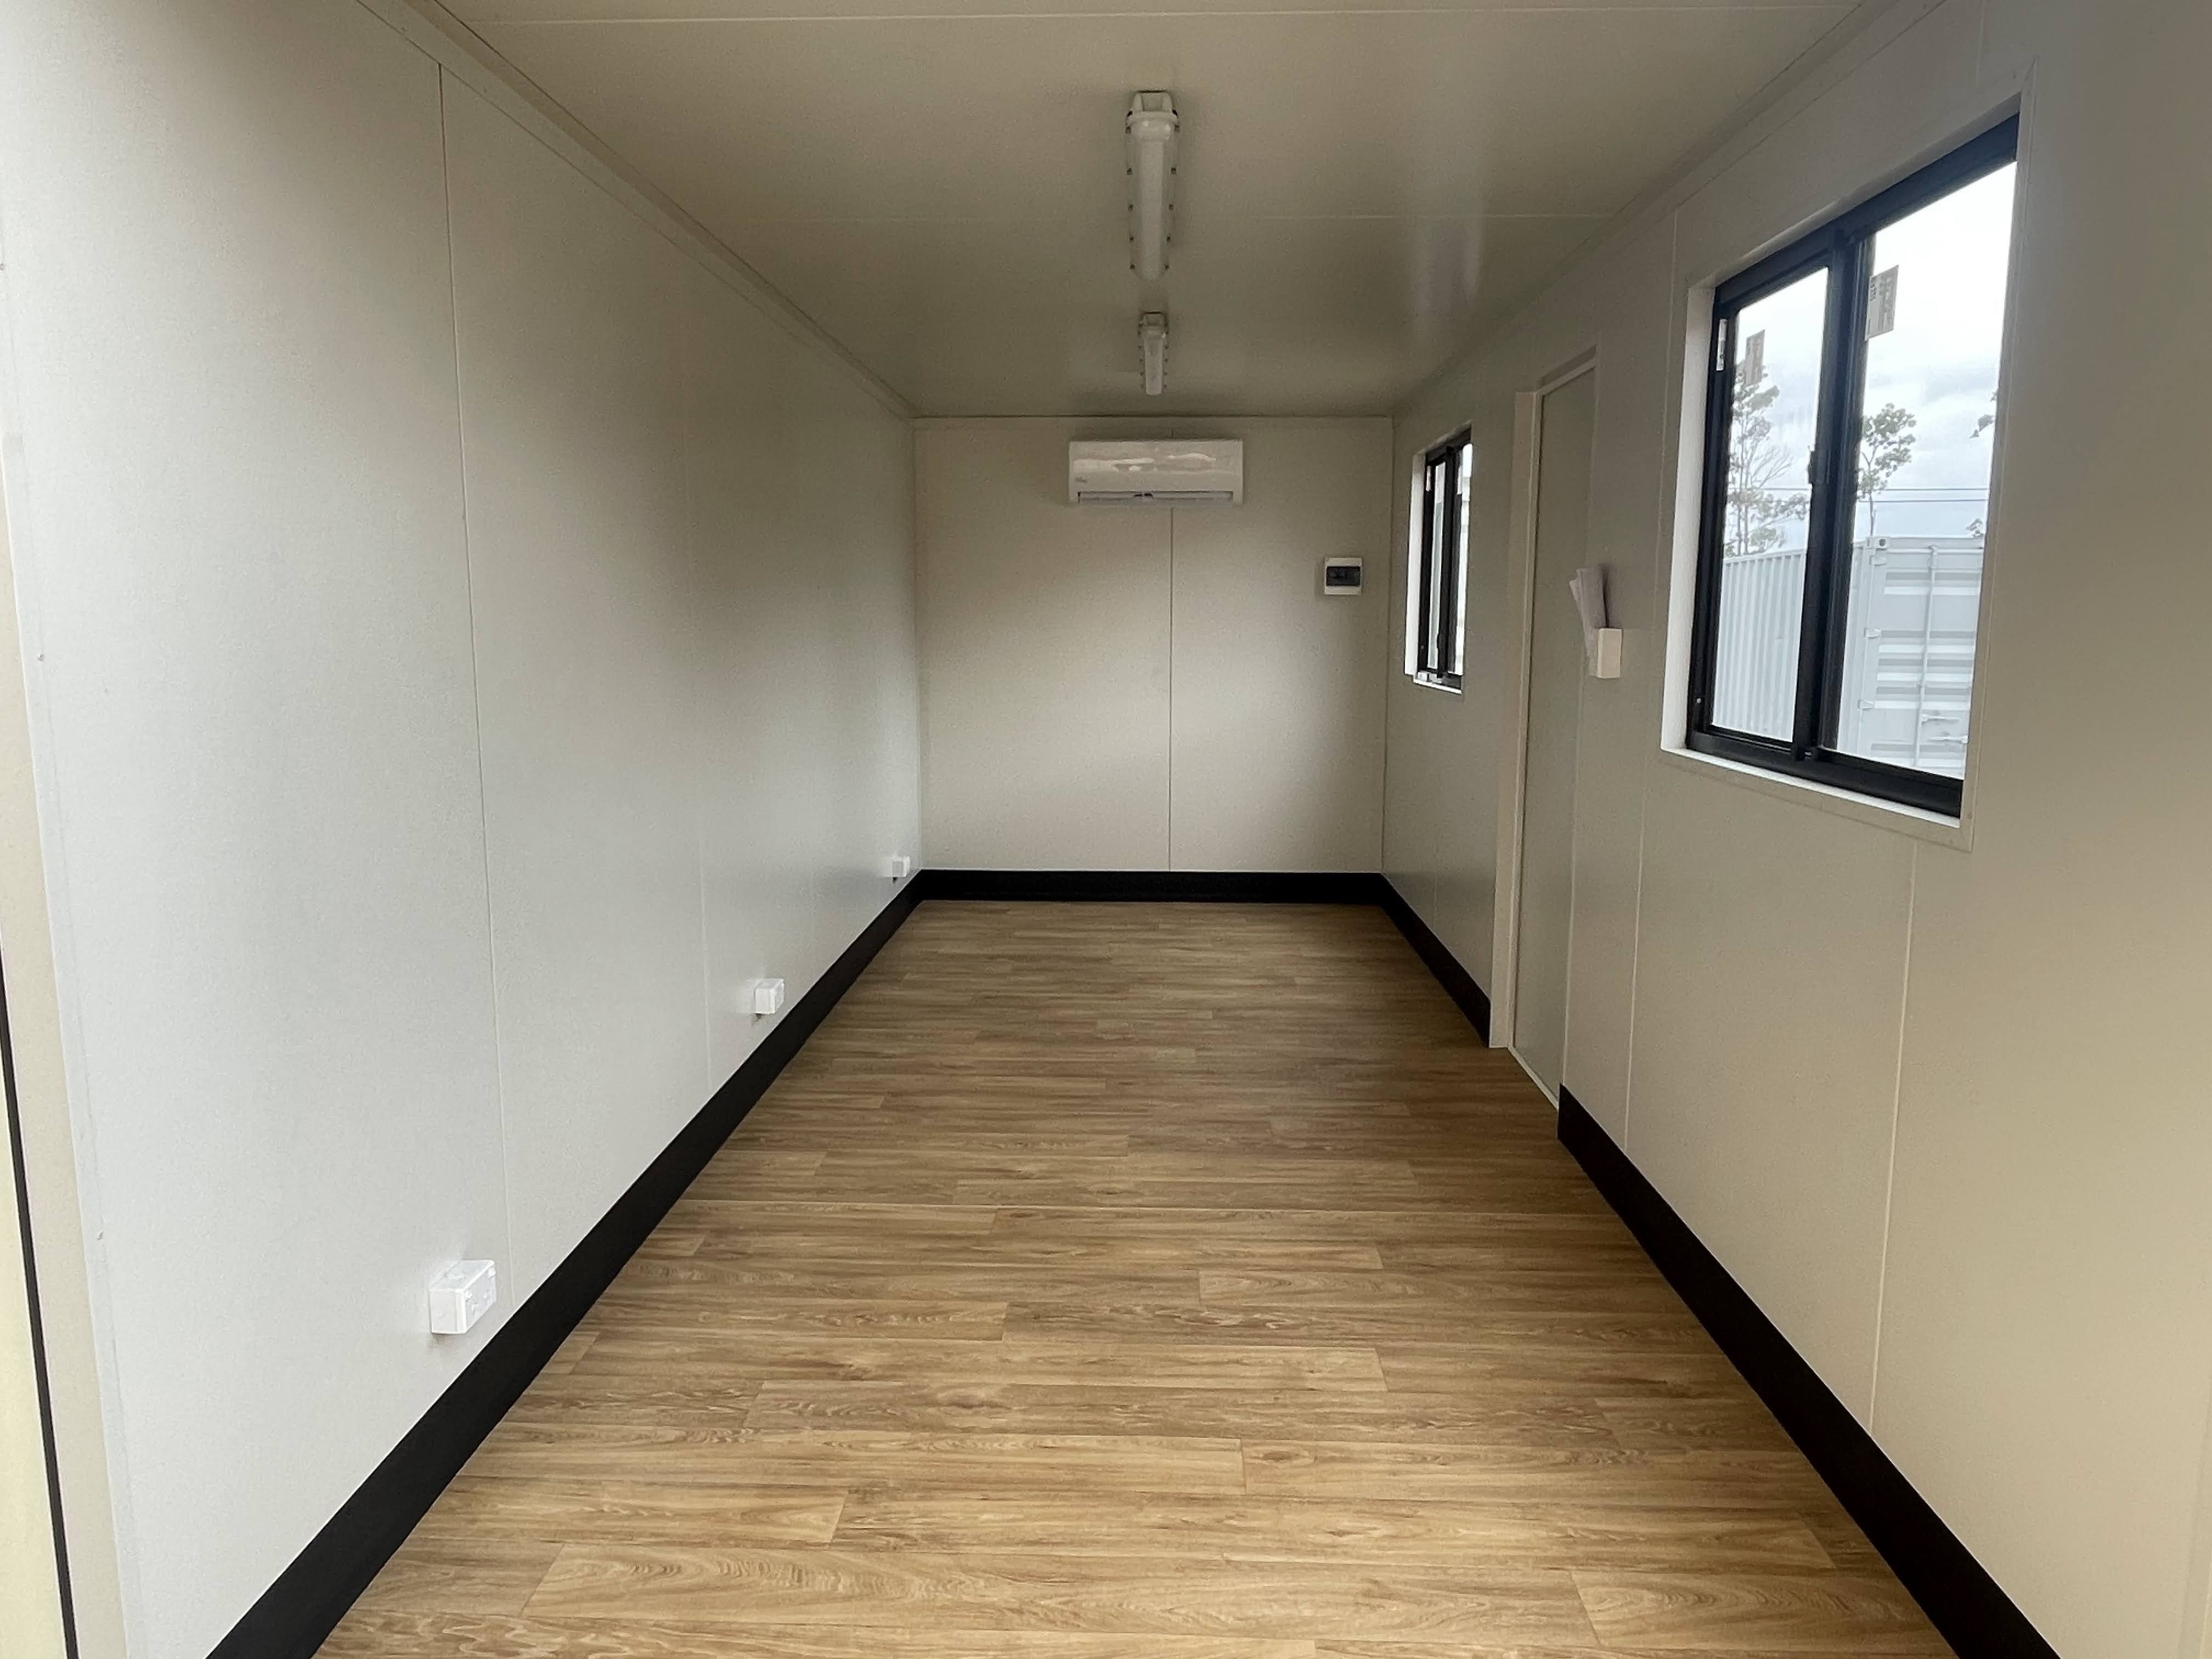 20ft shipping container office